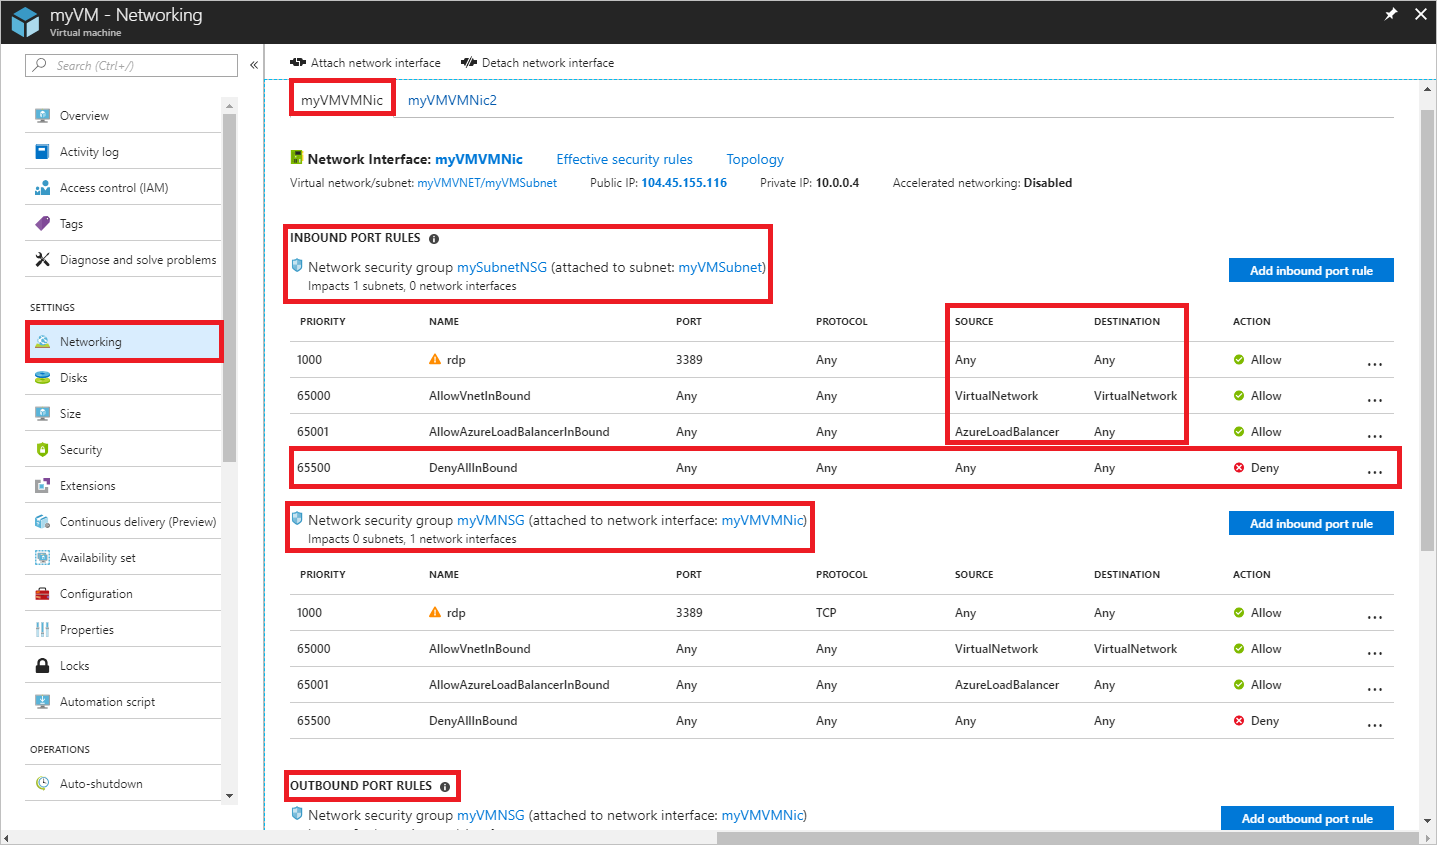 Screenshot shows the Azure portal with Networking settings for my V M V M Nic.